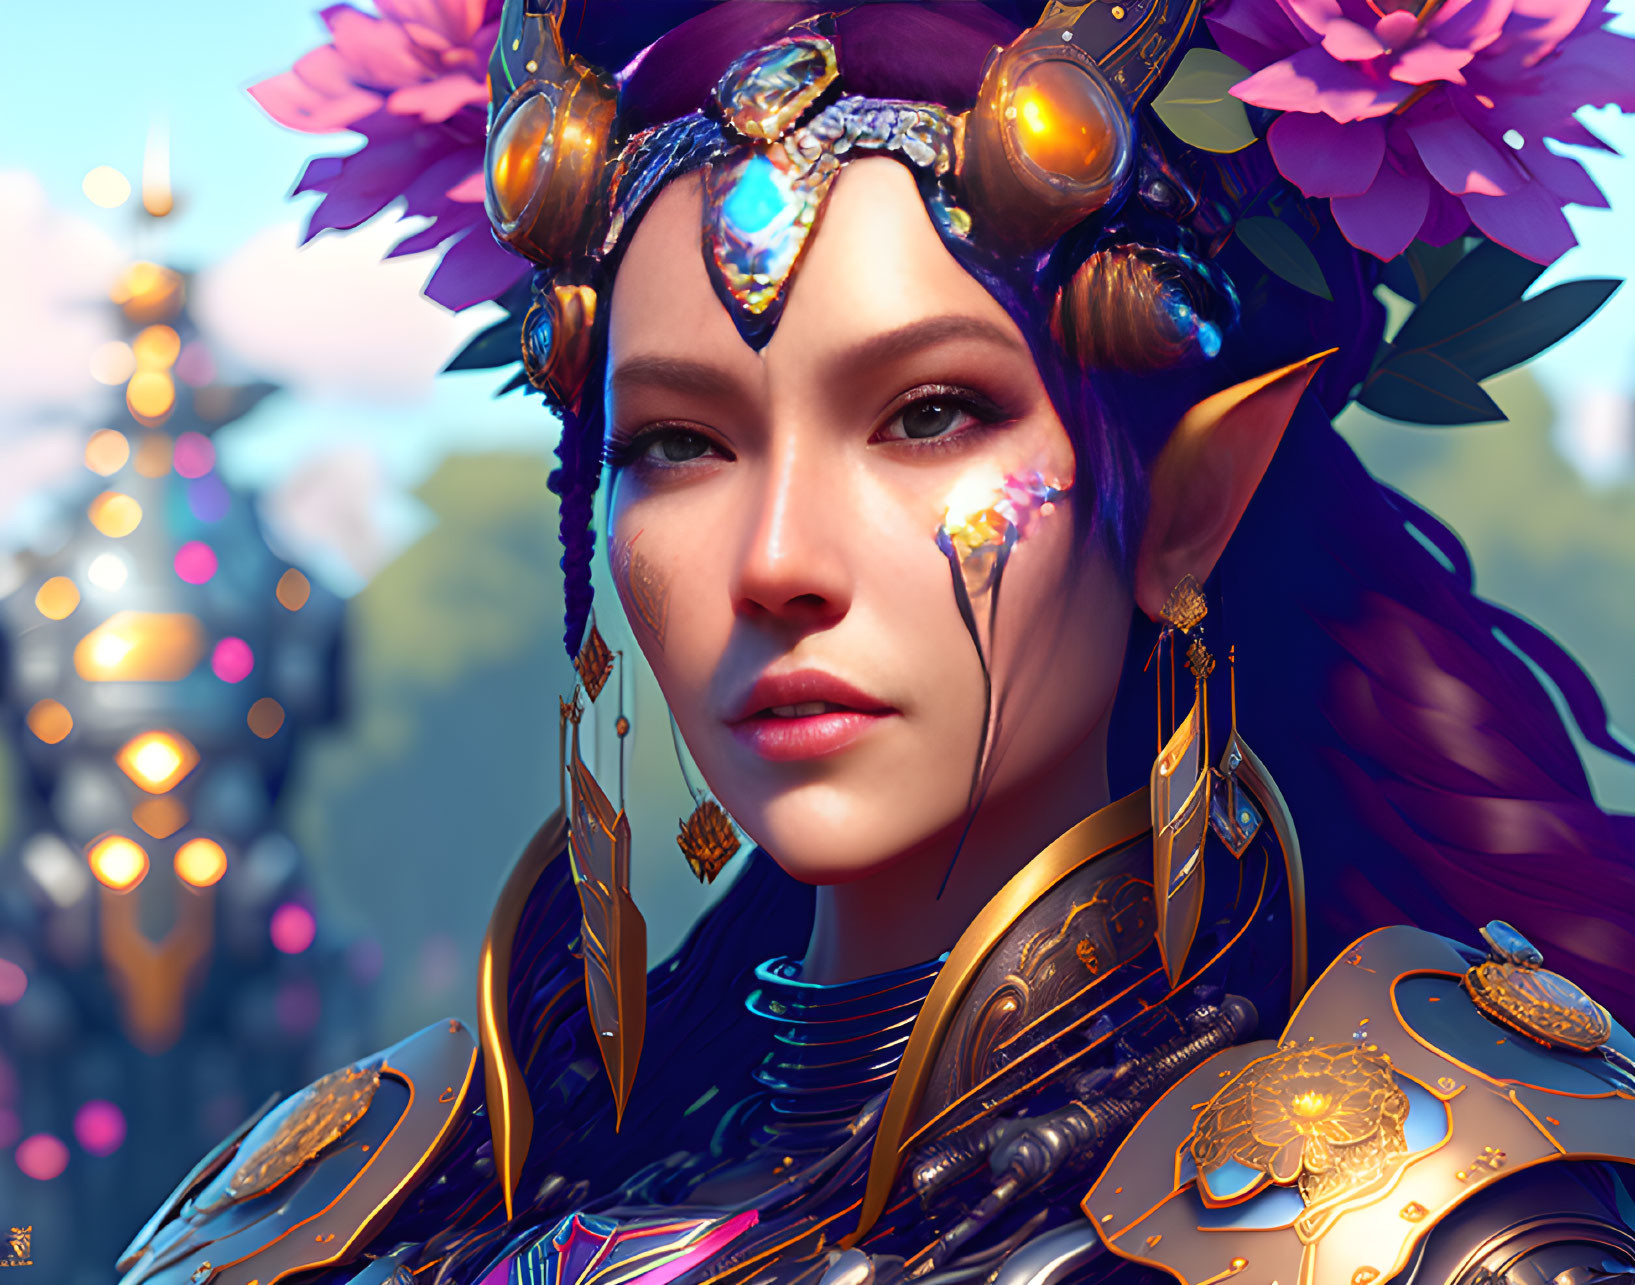 Fantasy female character with pointed ears and golden armor in digital artwork